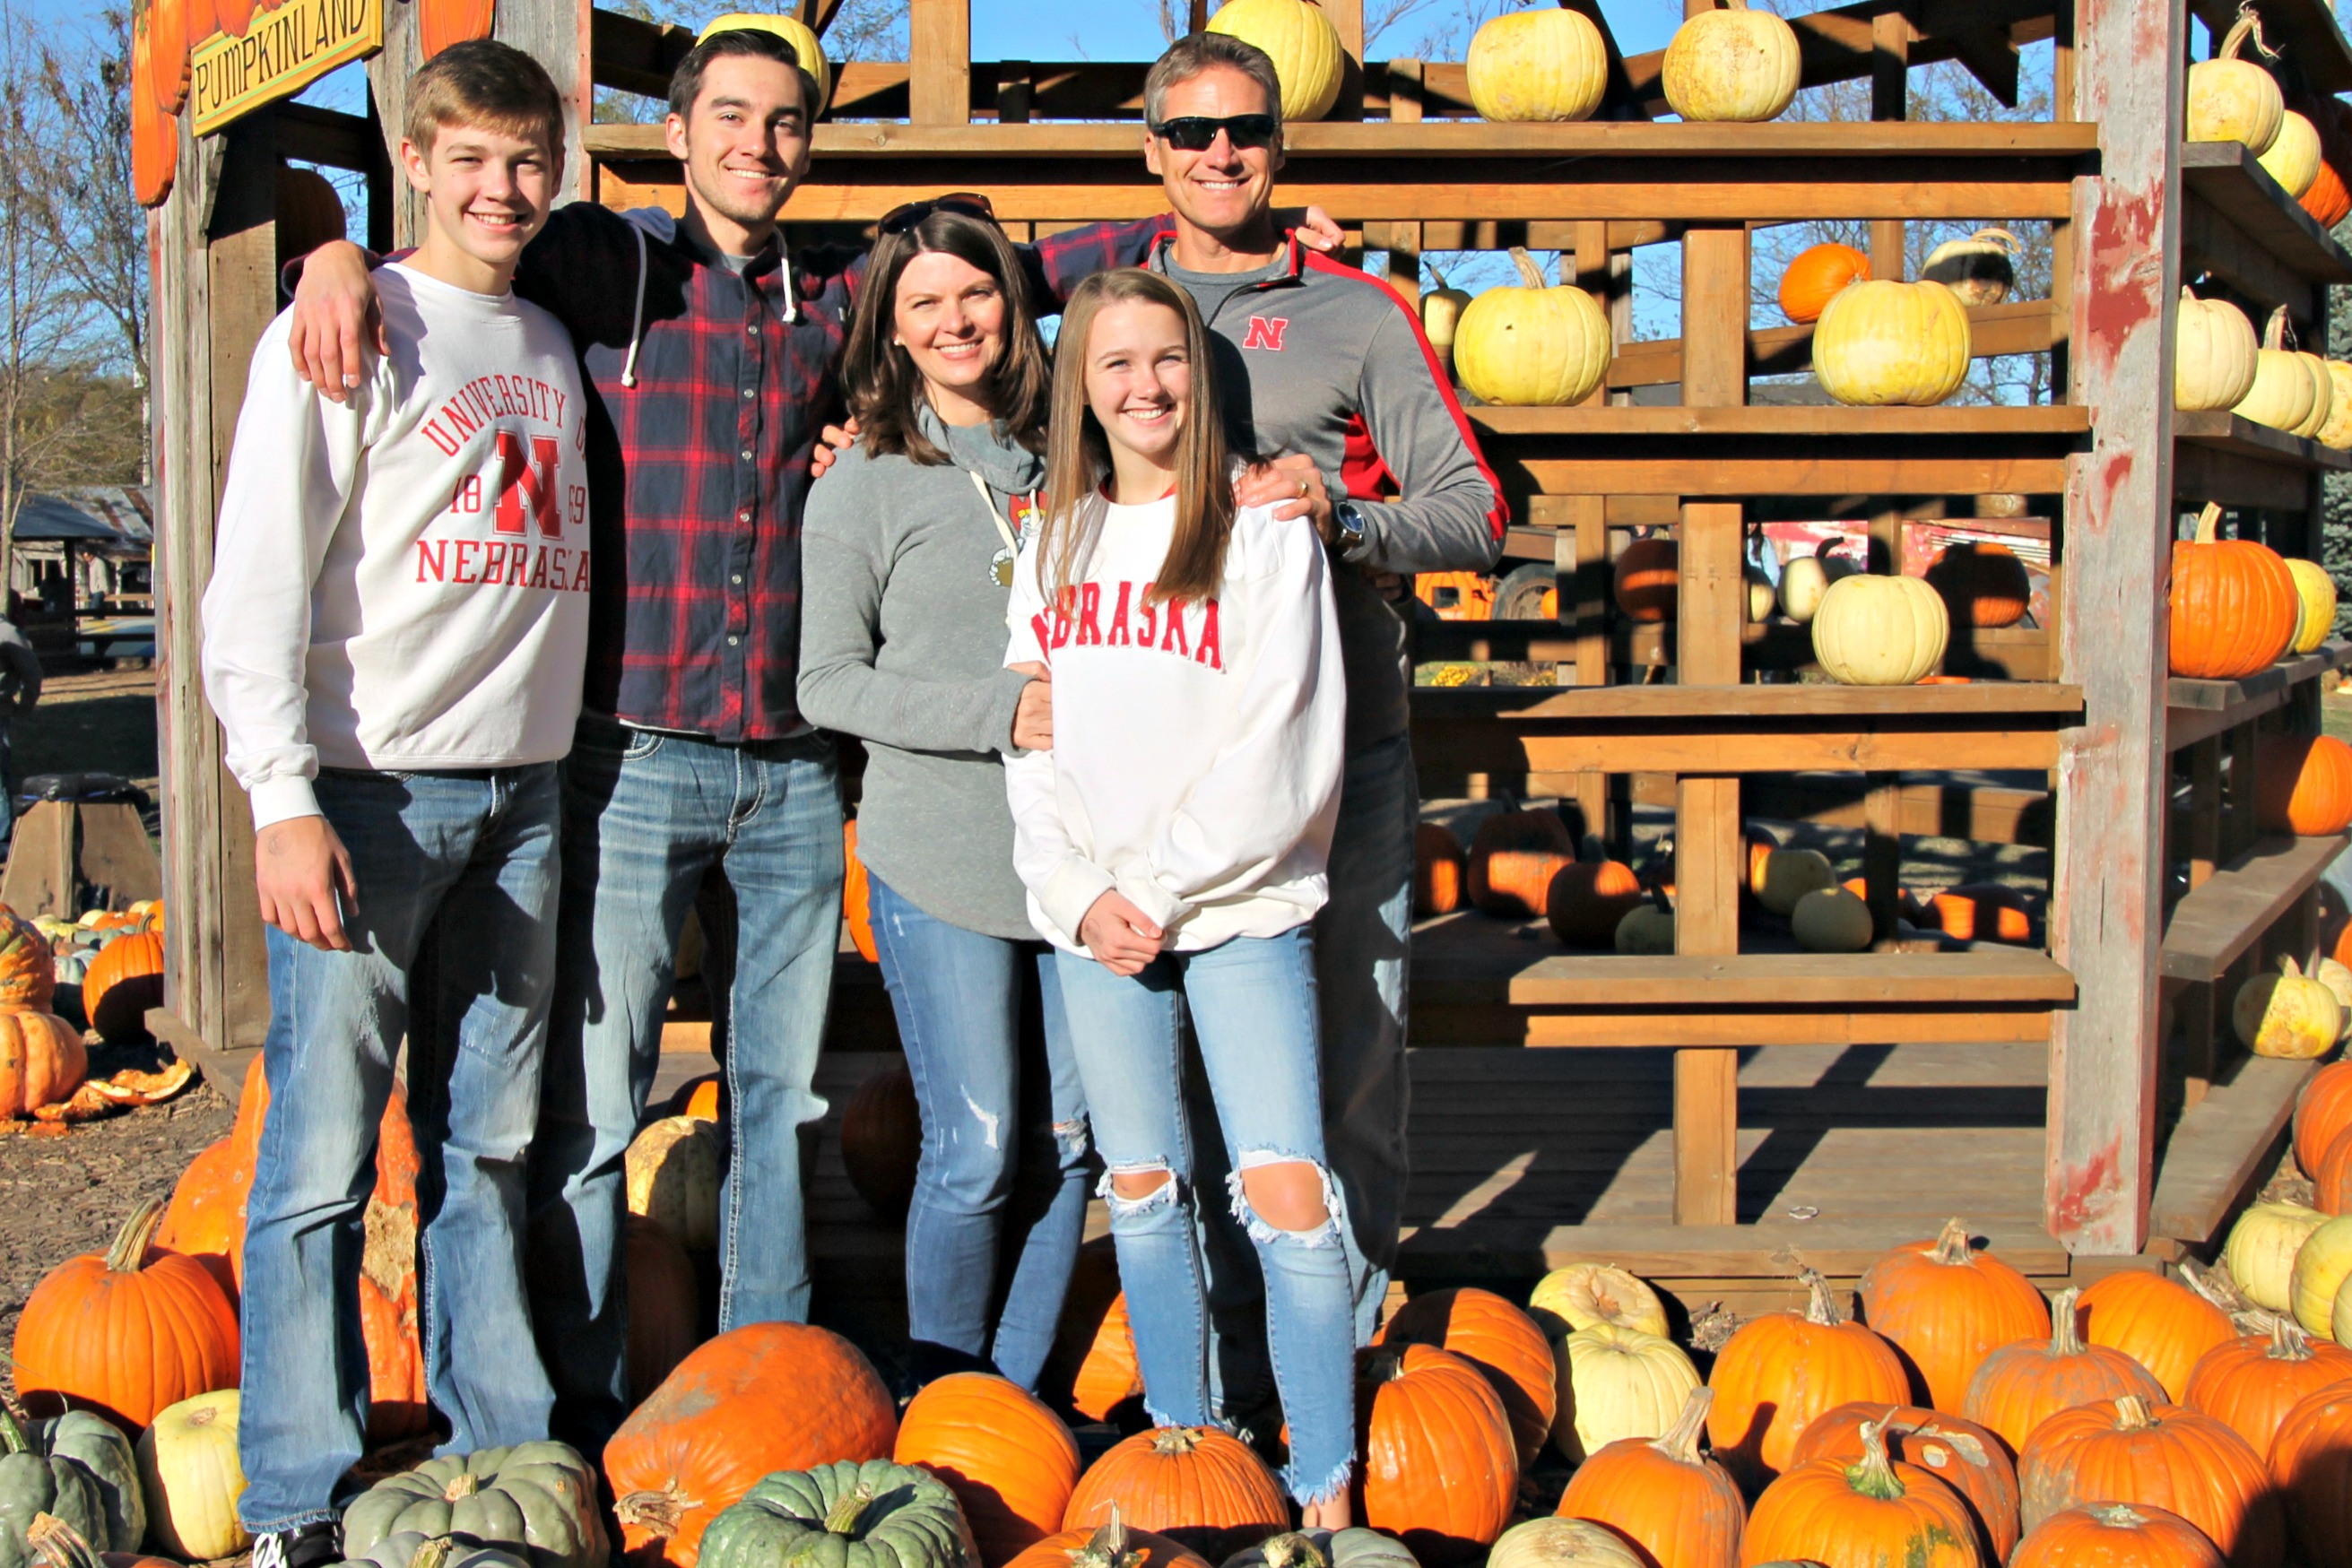 Family pumpkin patch pic